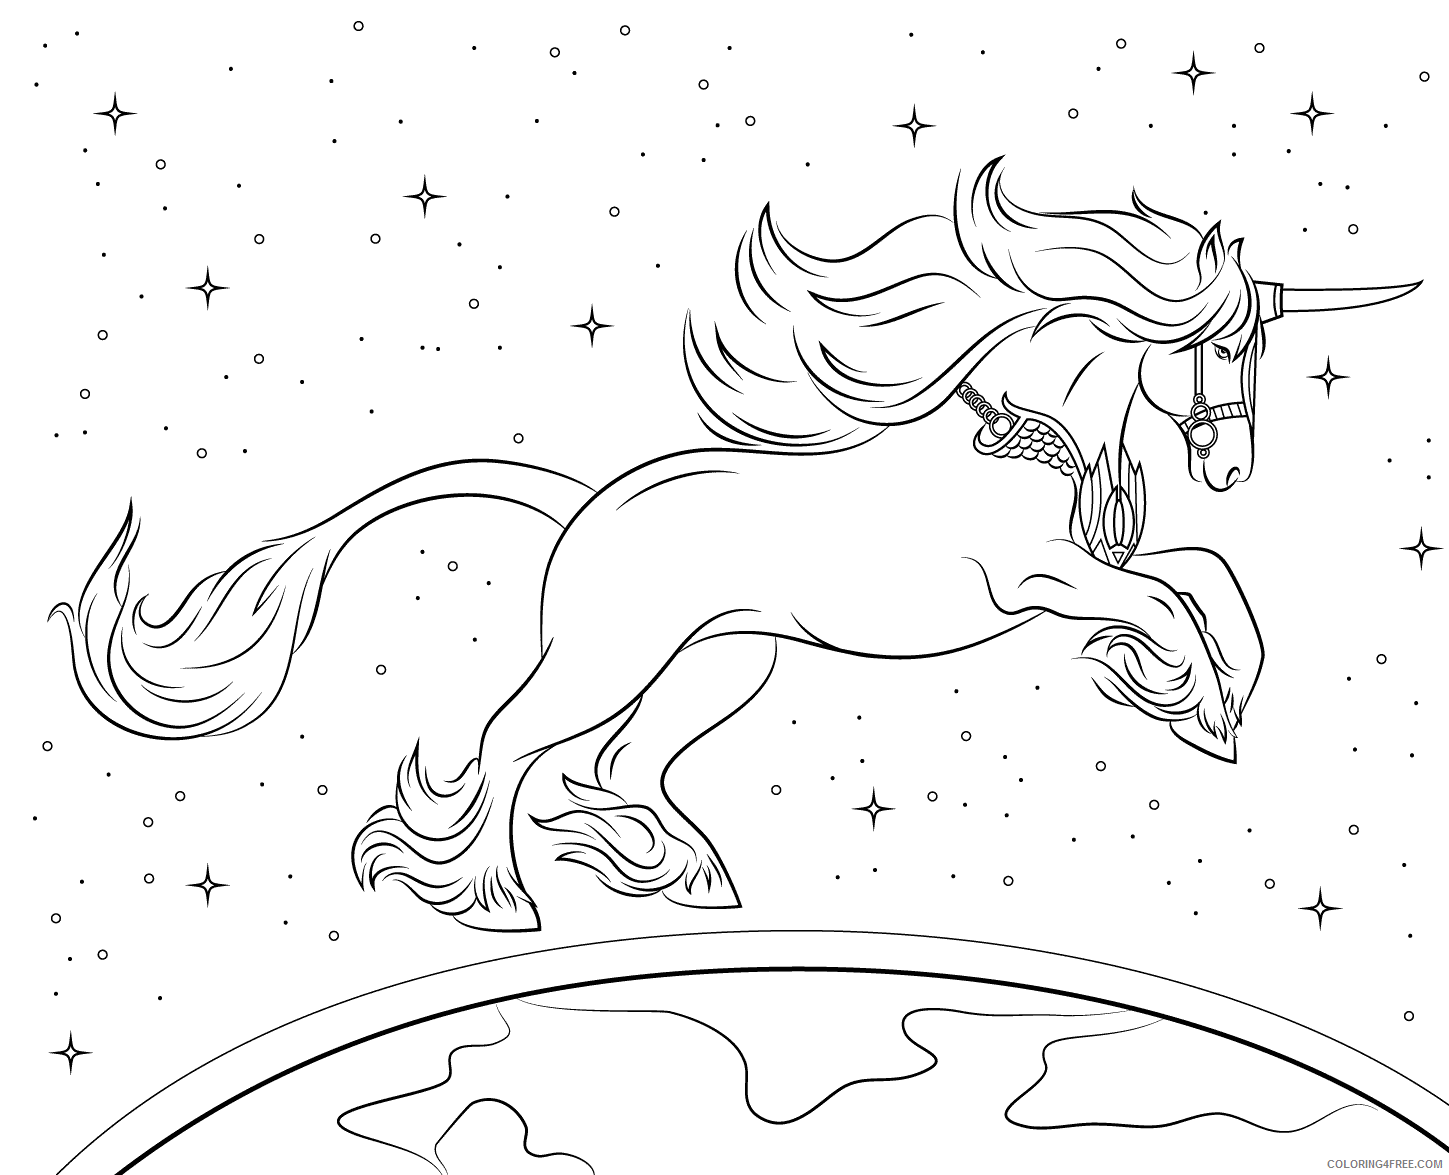 Adult Unicorn Coloring Pages Fantasy Unicorn for Adults Printable 2021 0078 Coloring4free